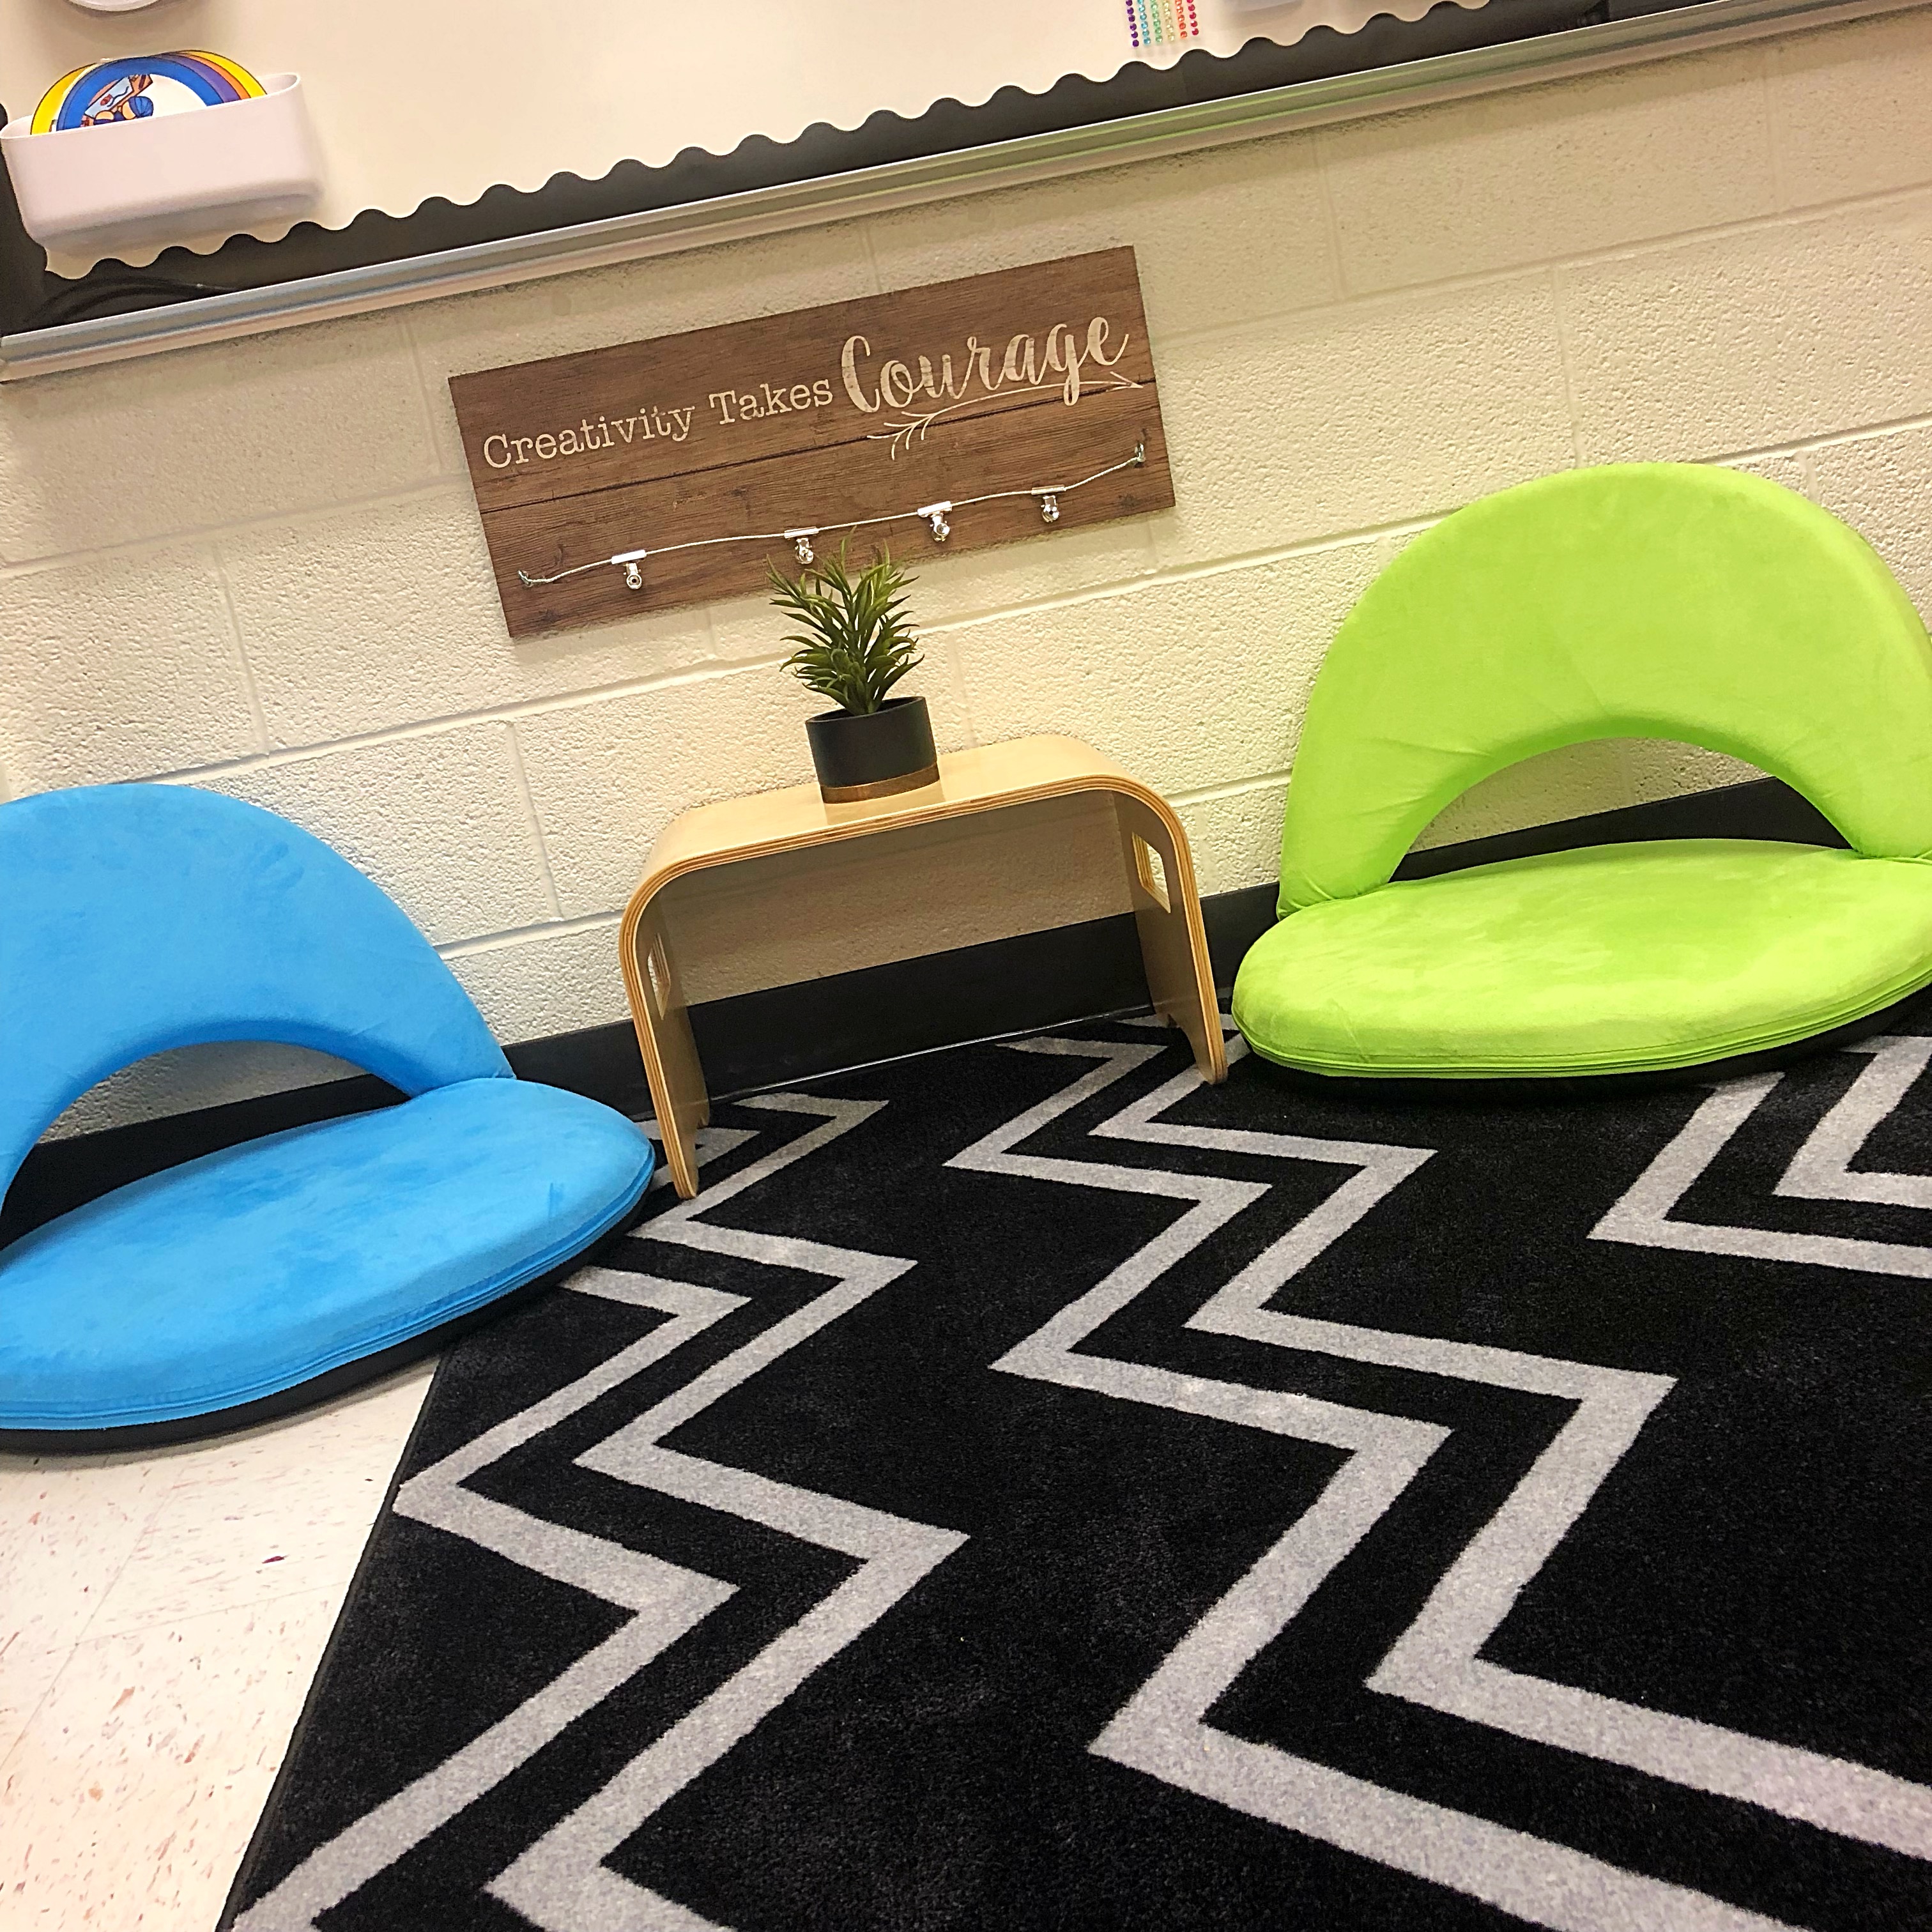 comfy foldable floor seats from Lakeshore learning and a student lap desk